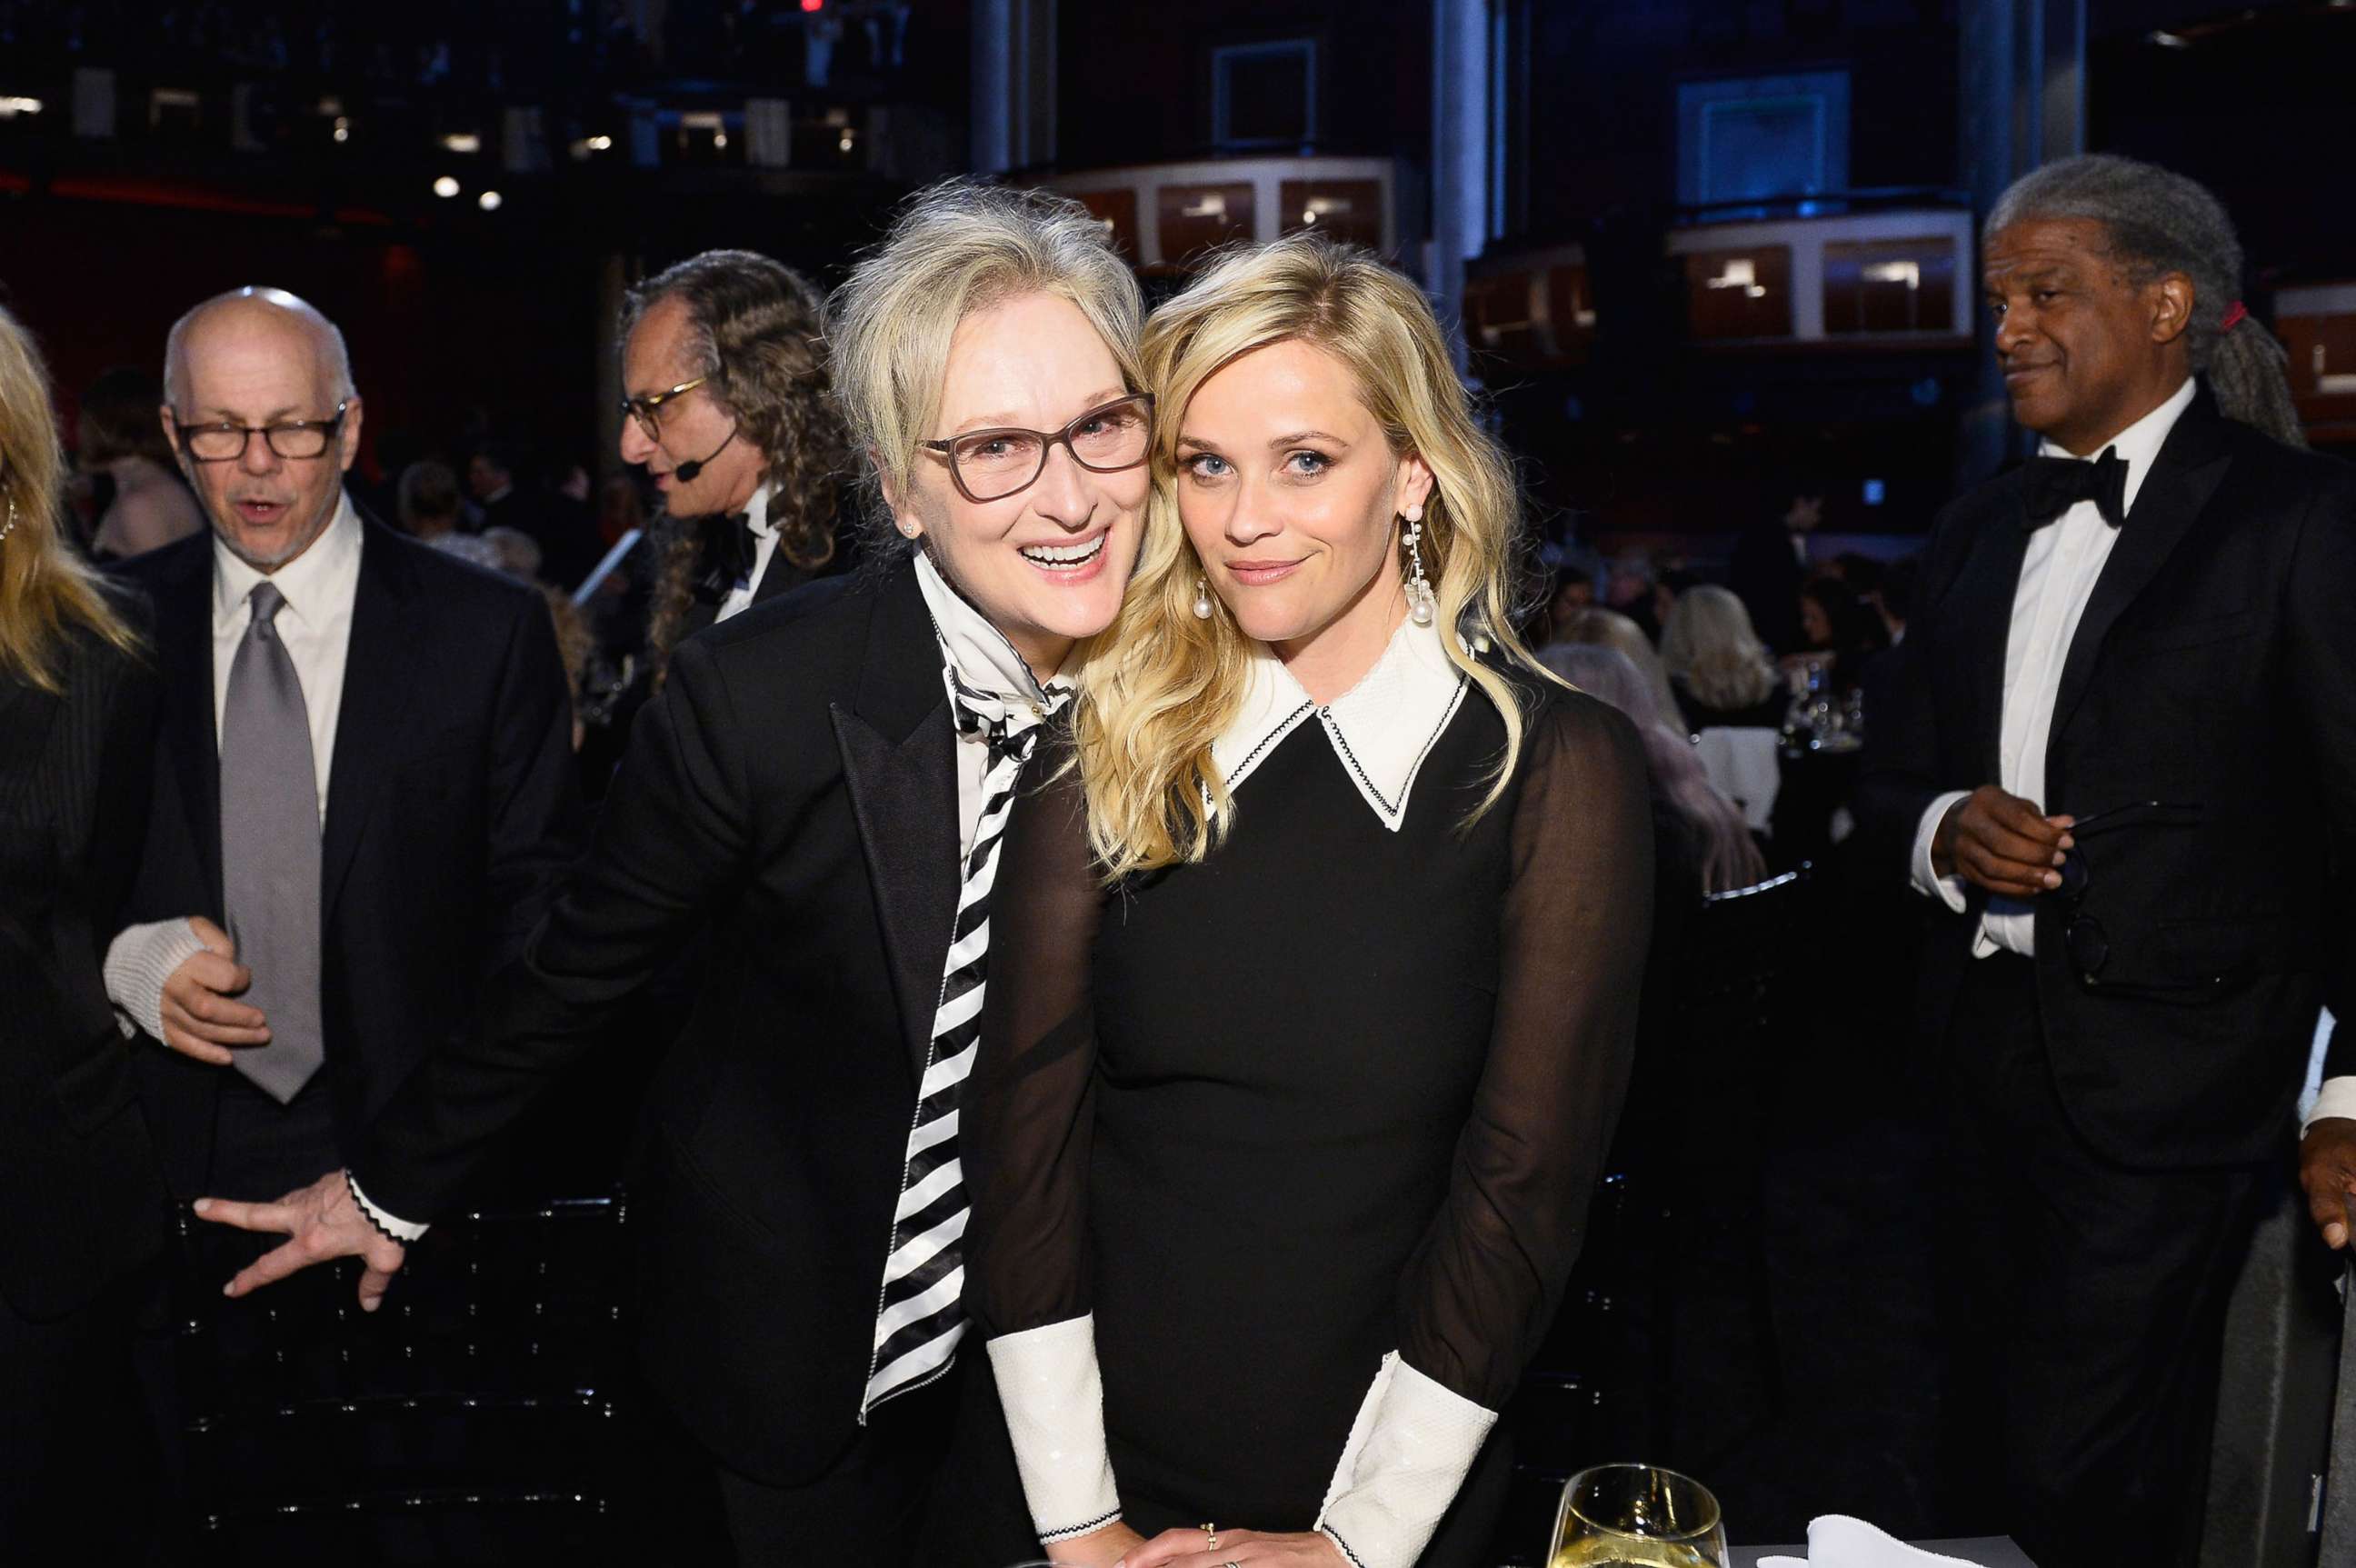 PHOTO: Meryl Streep and Reese Witherspoon pose during American Film Institute's 45th Life Achievement Award Gala Tribute to Diane Keaton, June 8, 2017 in Hollywood.